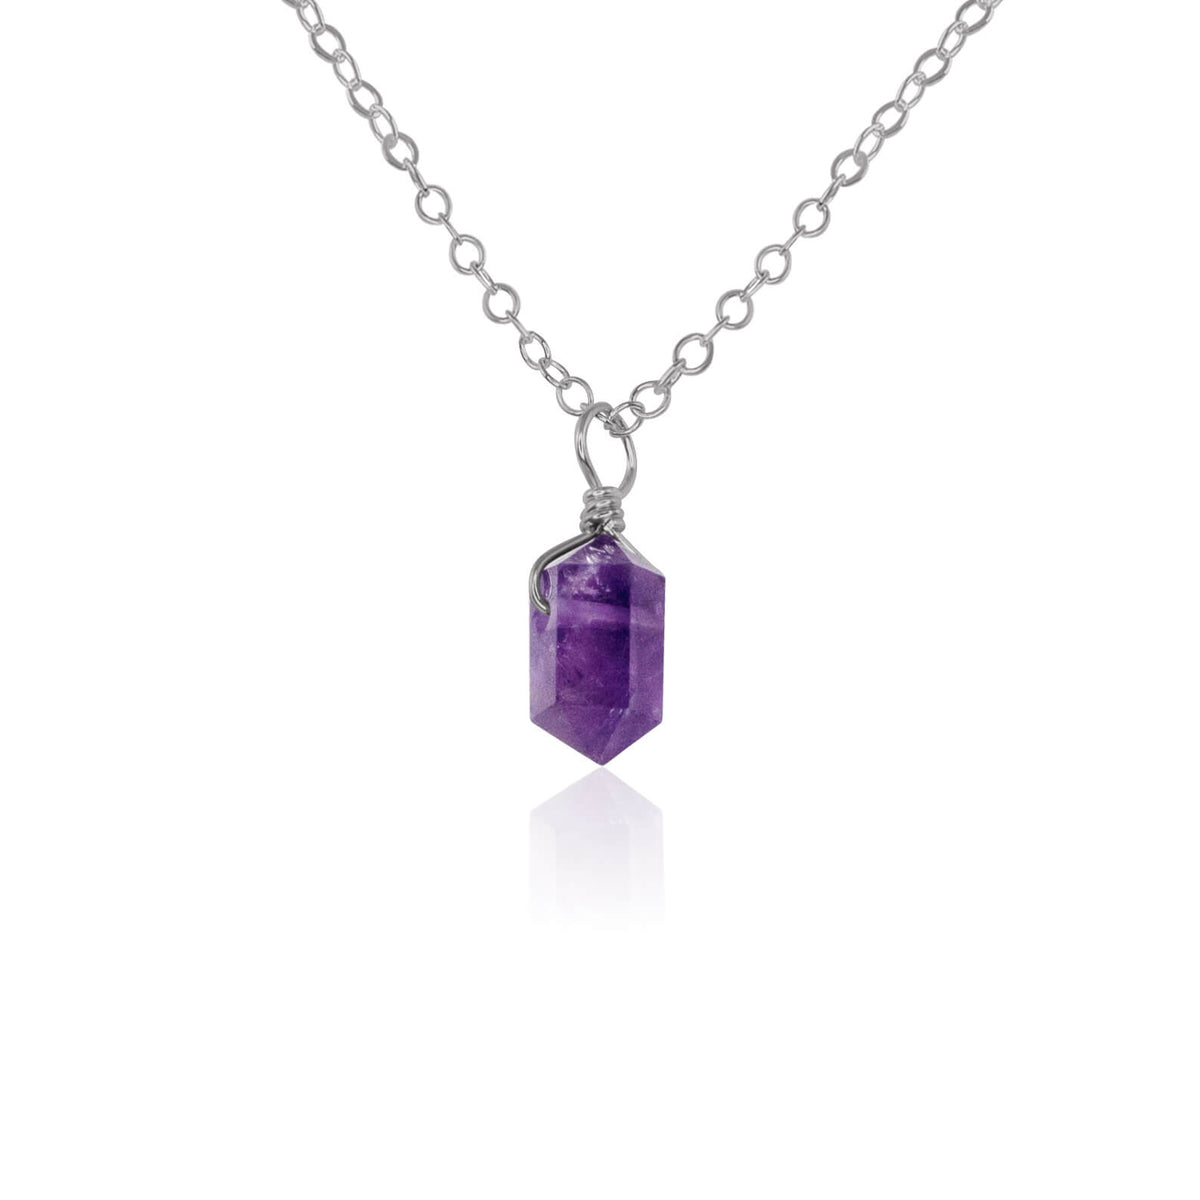 Double Terminated Crystal Pendant Necklace - Amethyst - Stainless Steel - Luna Tide Handmade Jewellery